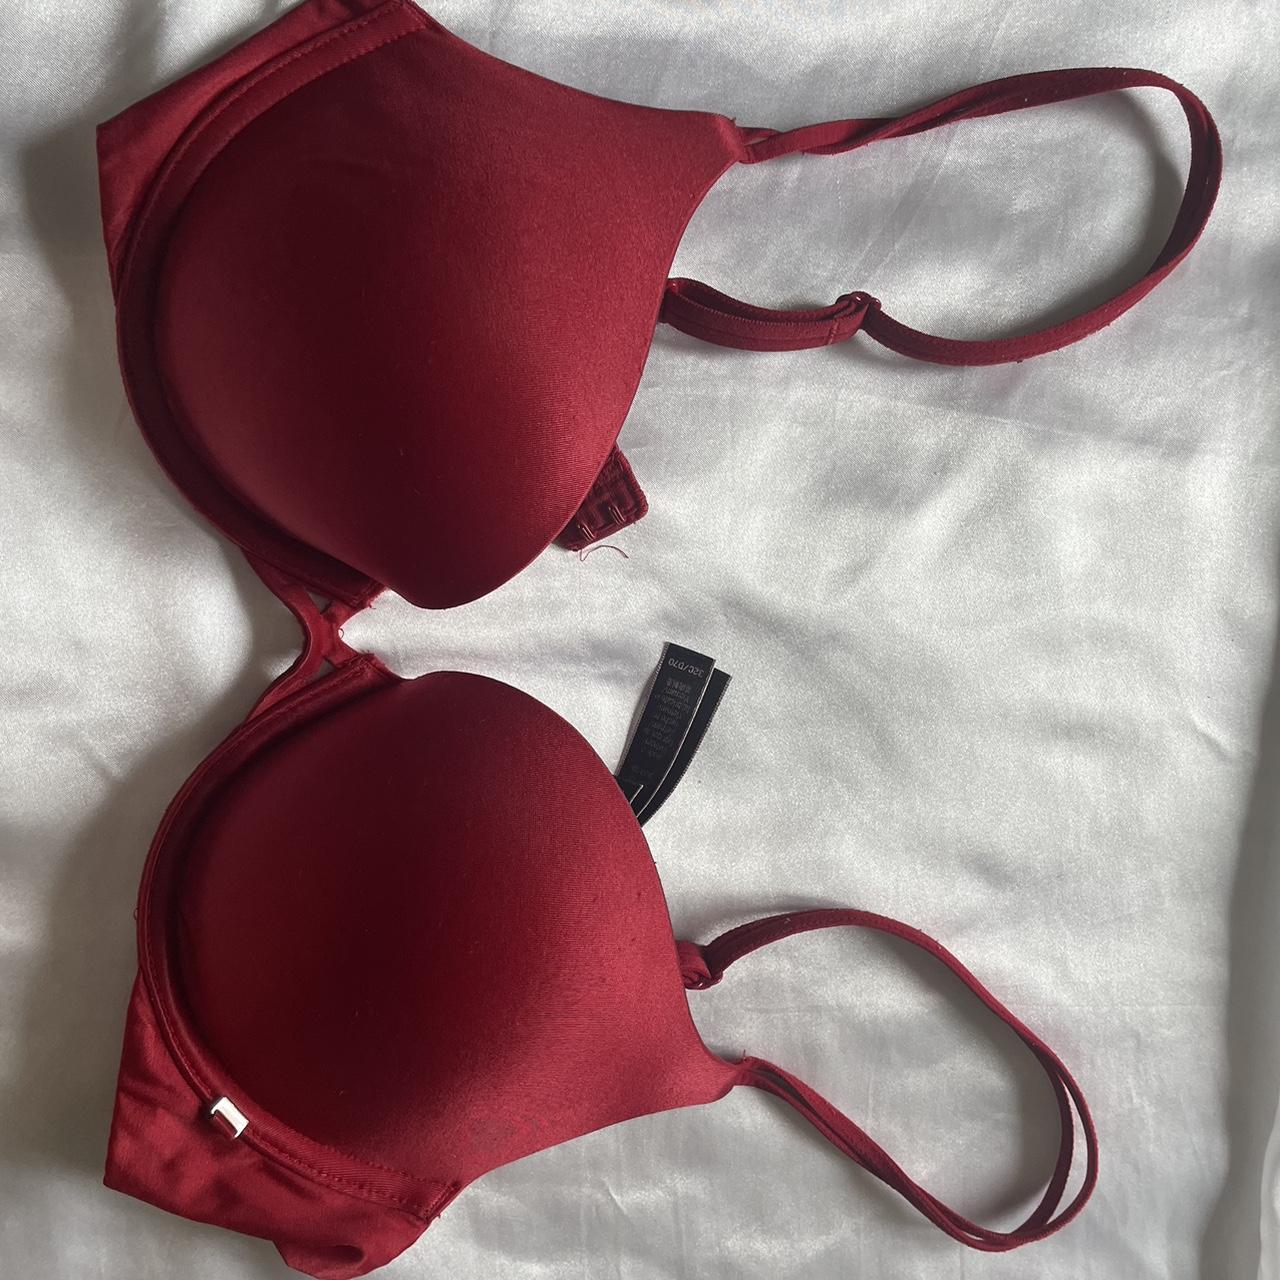 New with tags Maidenform push-up bra in burgundy - Depop